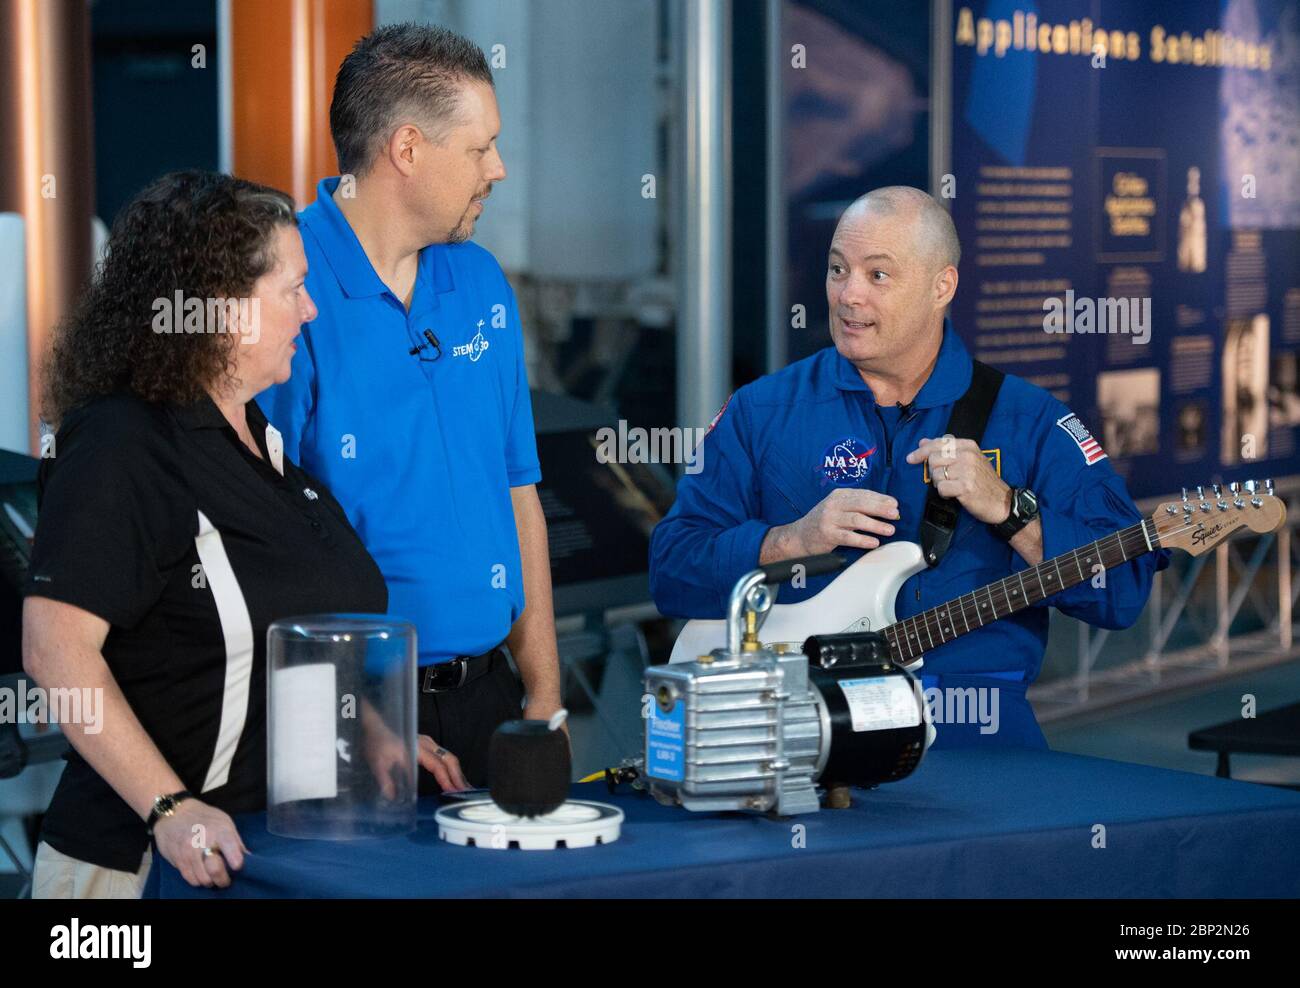 Astronaut Tingle at Udvar-Hazy Center  NASA astronaut Scott Tingle helps conduct an experiment about sound waves in a vacuum during a taping of STEM in 30 with Beth Wilson and Marty Kelsey, Wednesday, Sept. 12, 2018 at the Smithsonian National Air and Space Museum's Steven F. Udvar-Hazy Center in Chantilly, Va. Tingle spent 168 days onboard the International Space Station as part of Expeditions 54 and 55. Stock Photo